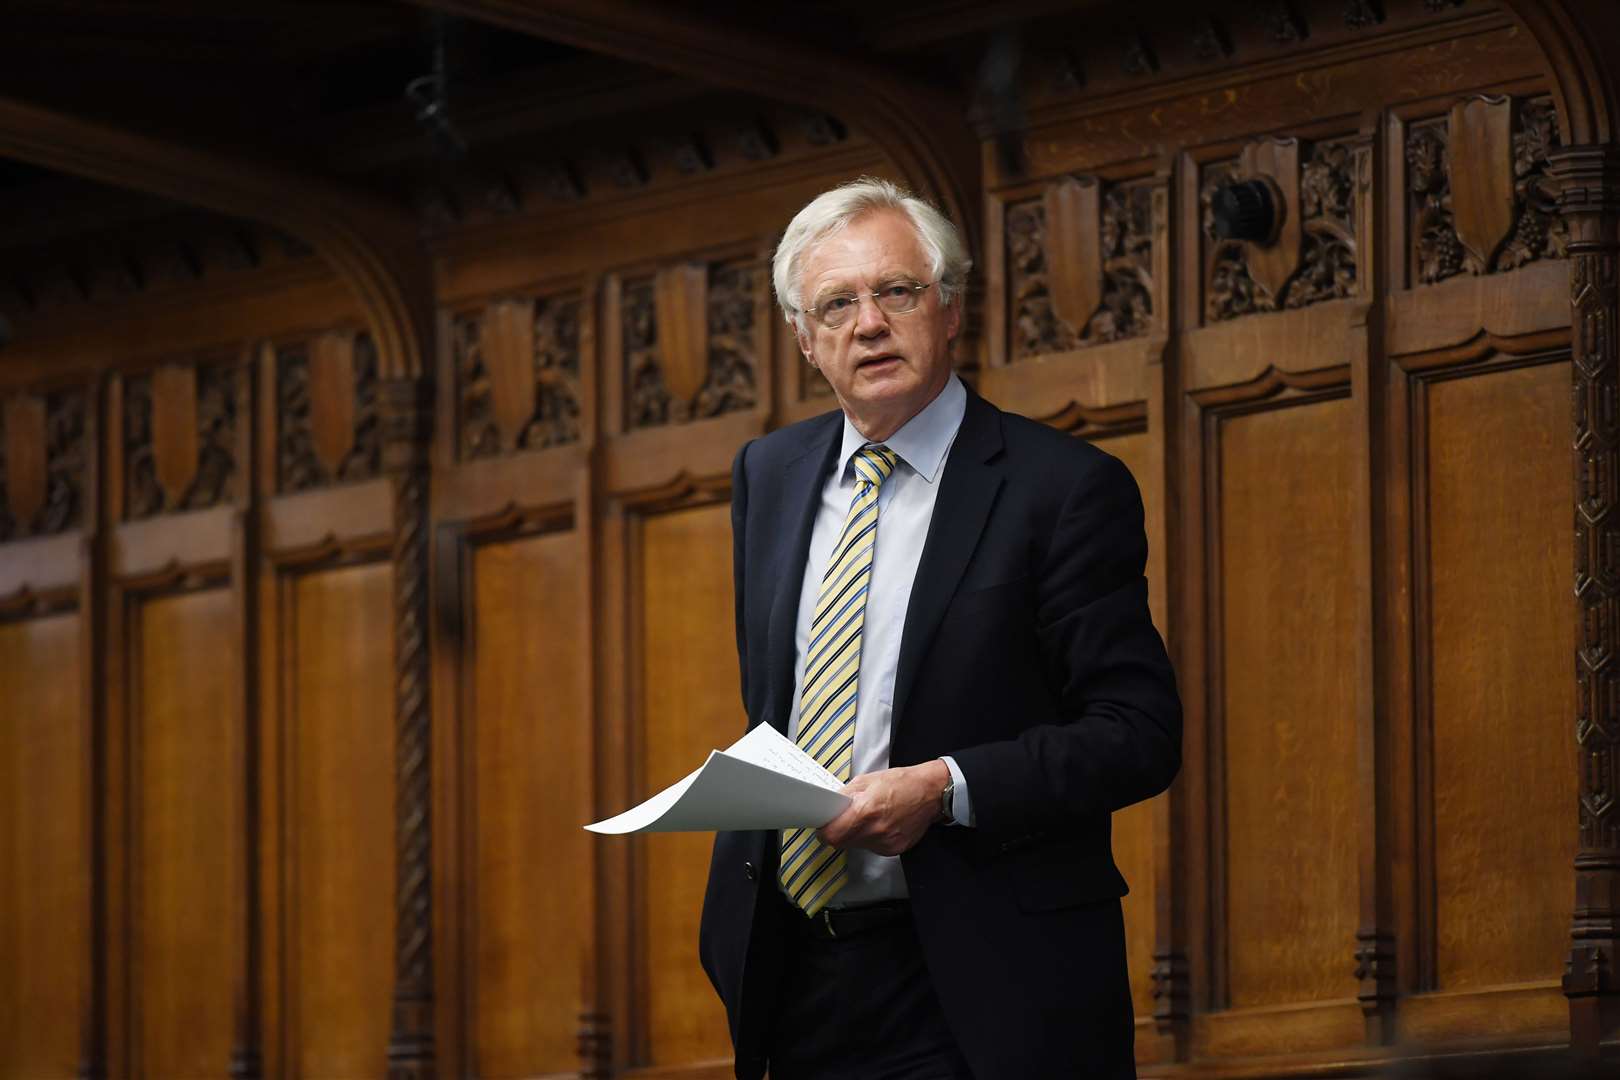 Former Tory Cabinet minister David Davis said he does not agree with suspending in-person meetings between MPs and constituents (UK Parliament/Jessica Taylor/PA)